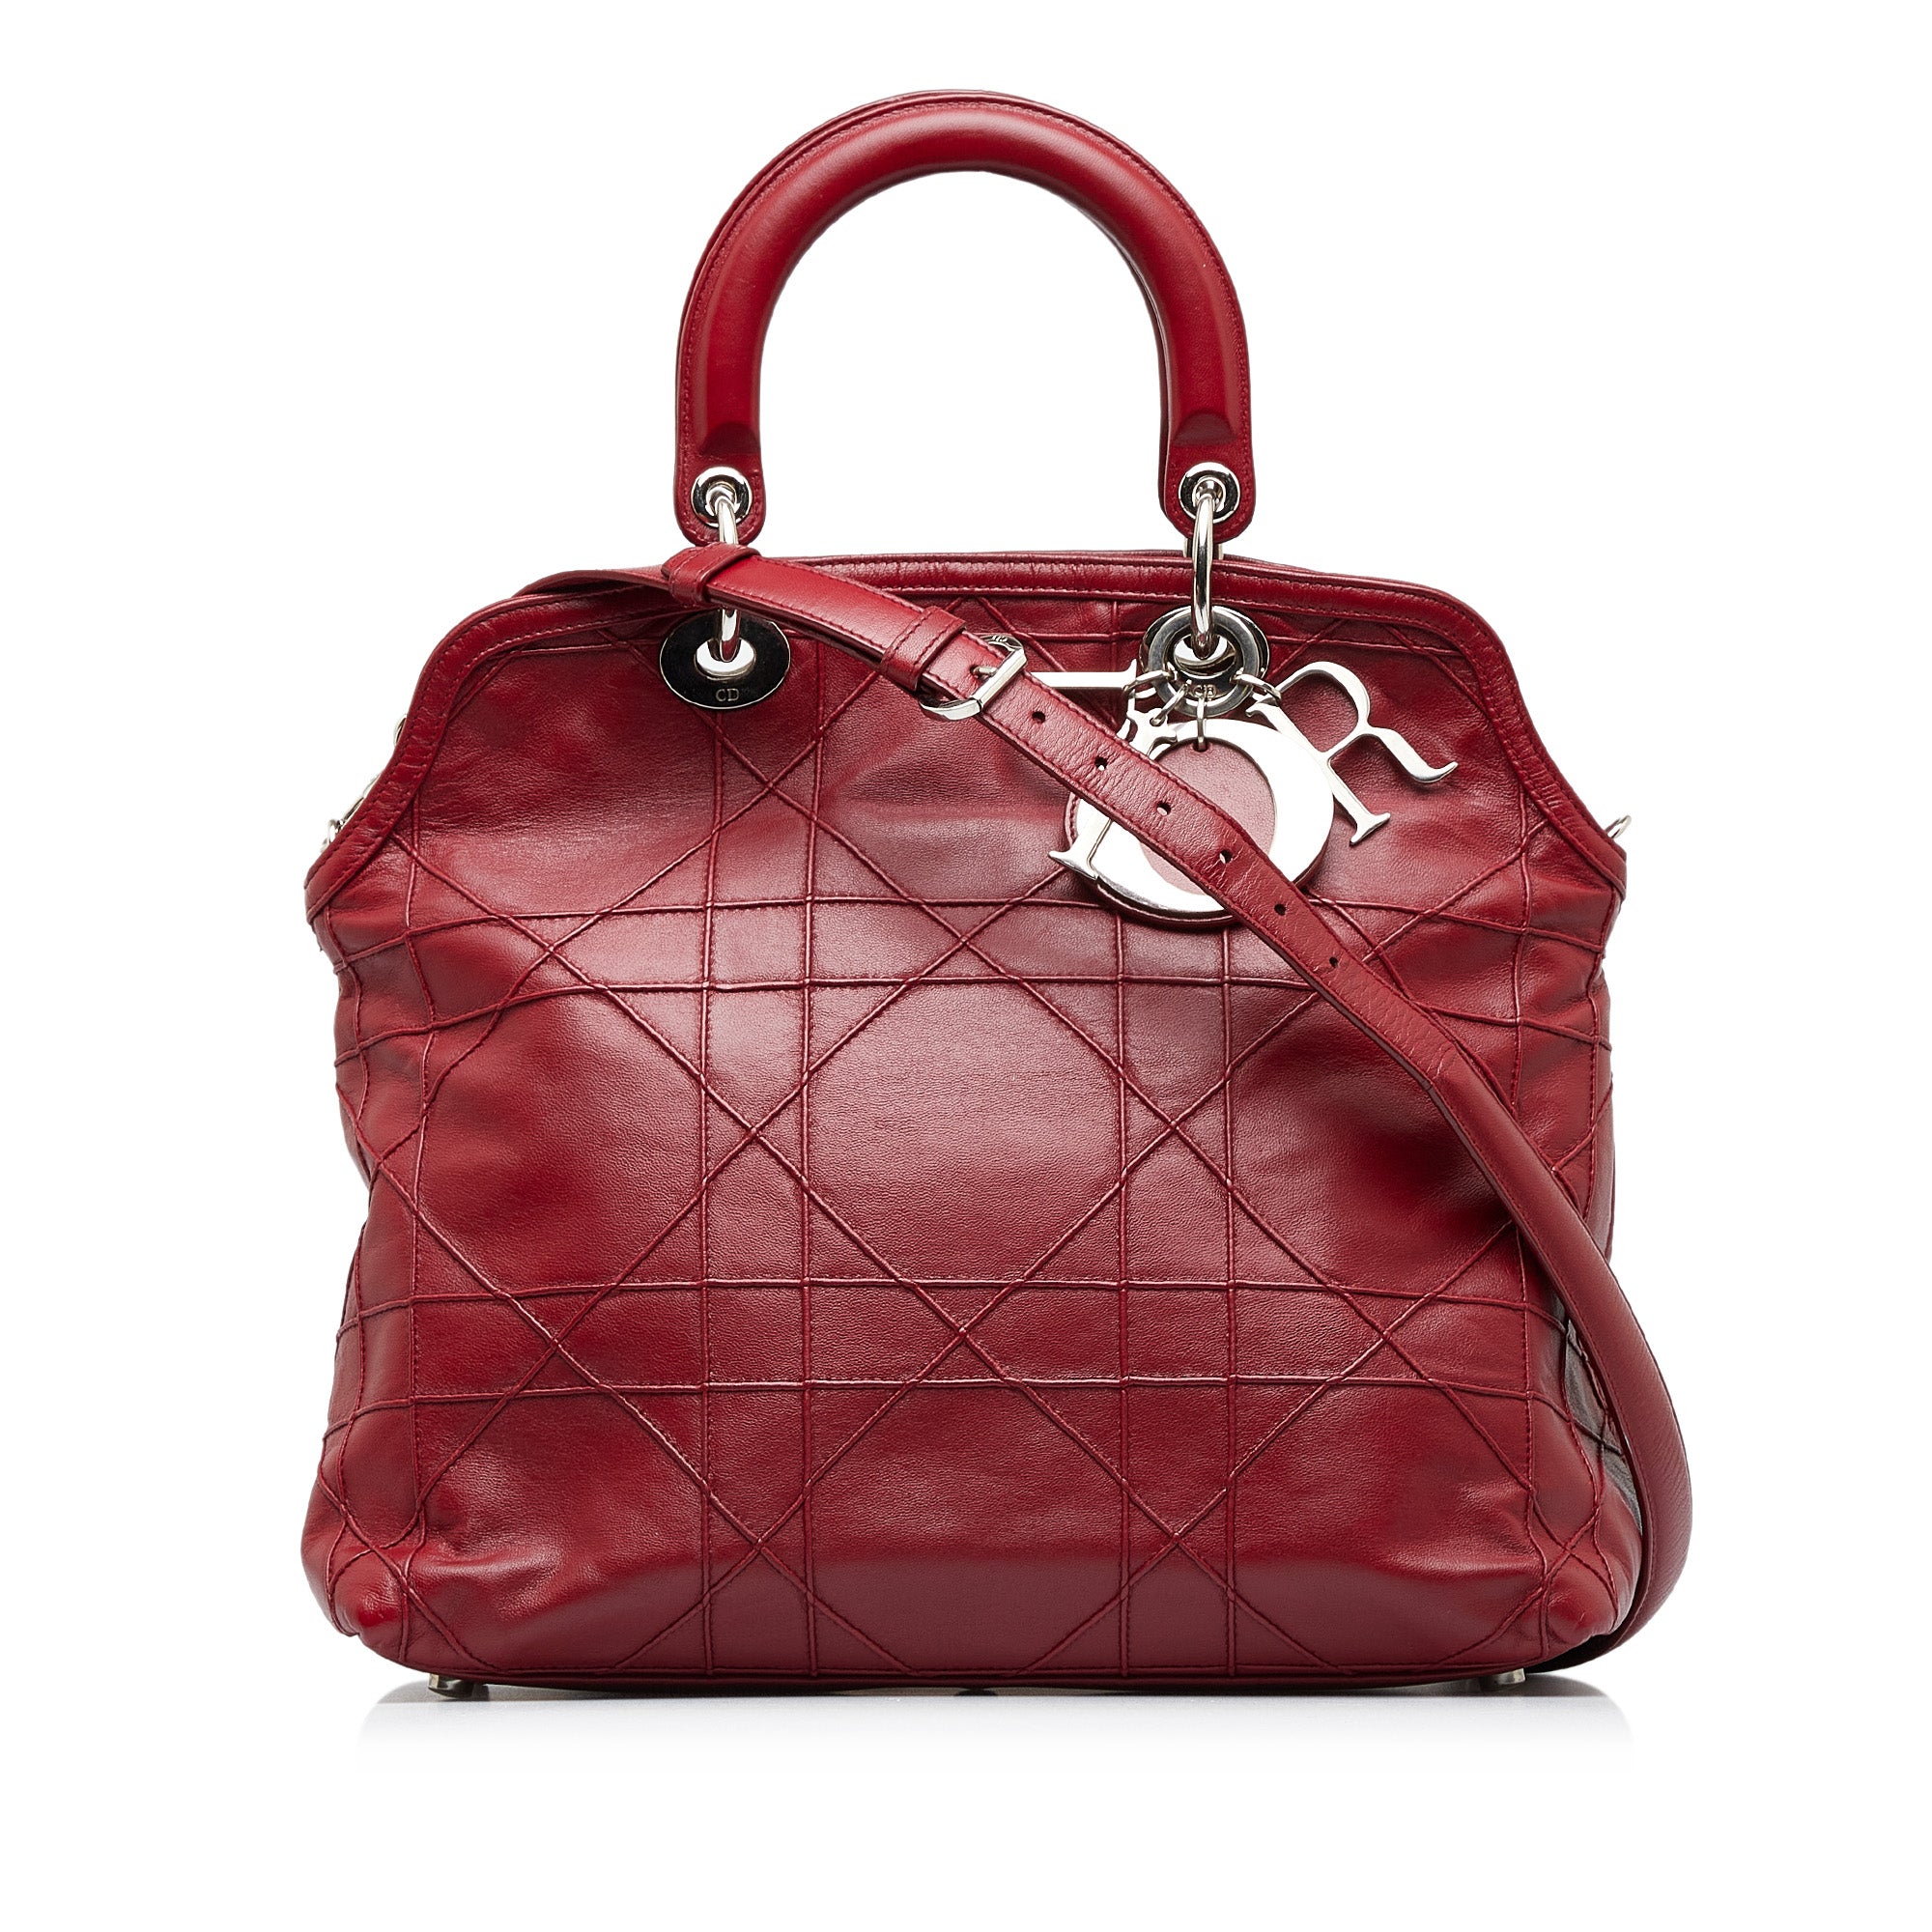 Dior Pink Bags & Handbags for Women, Authenticity Guaranteed